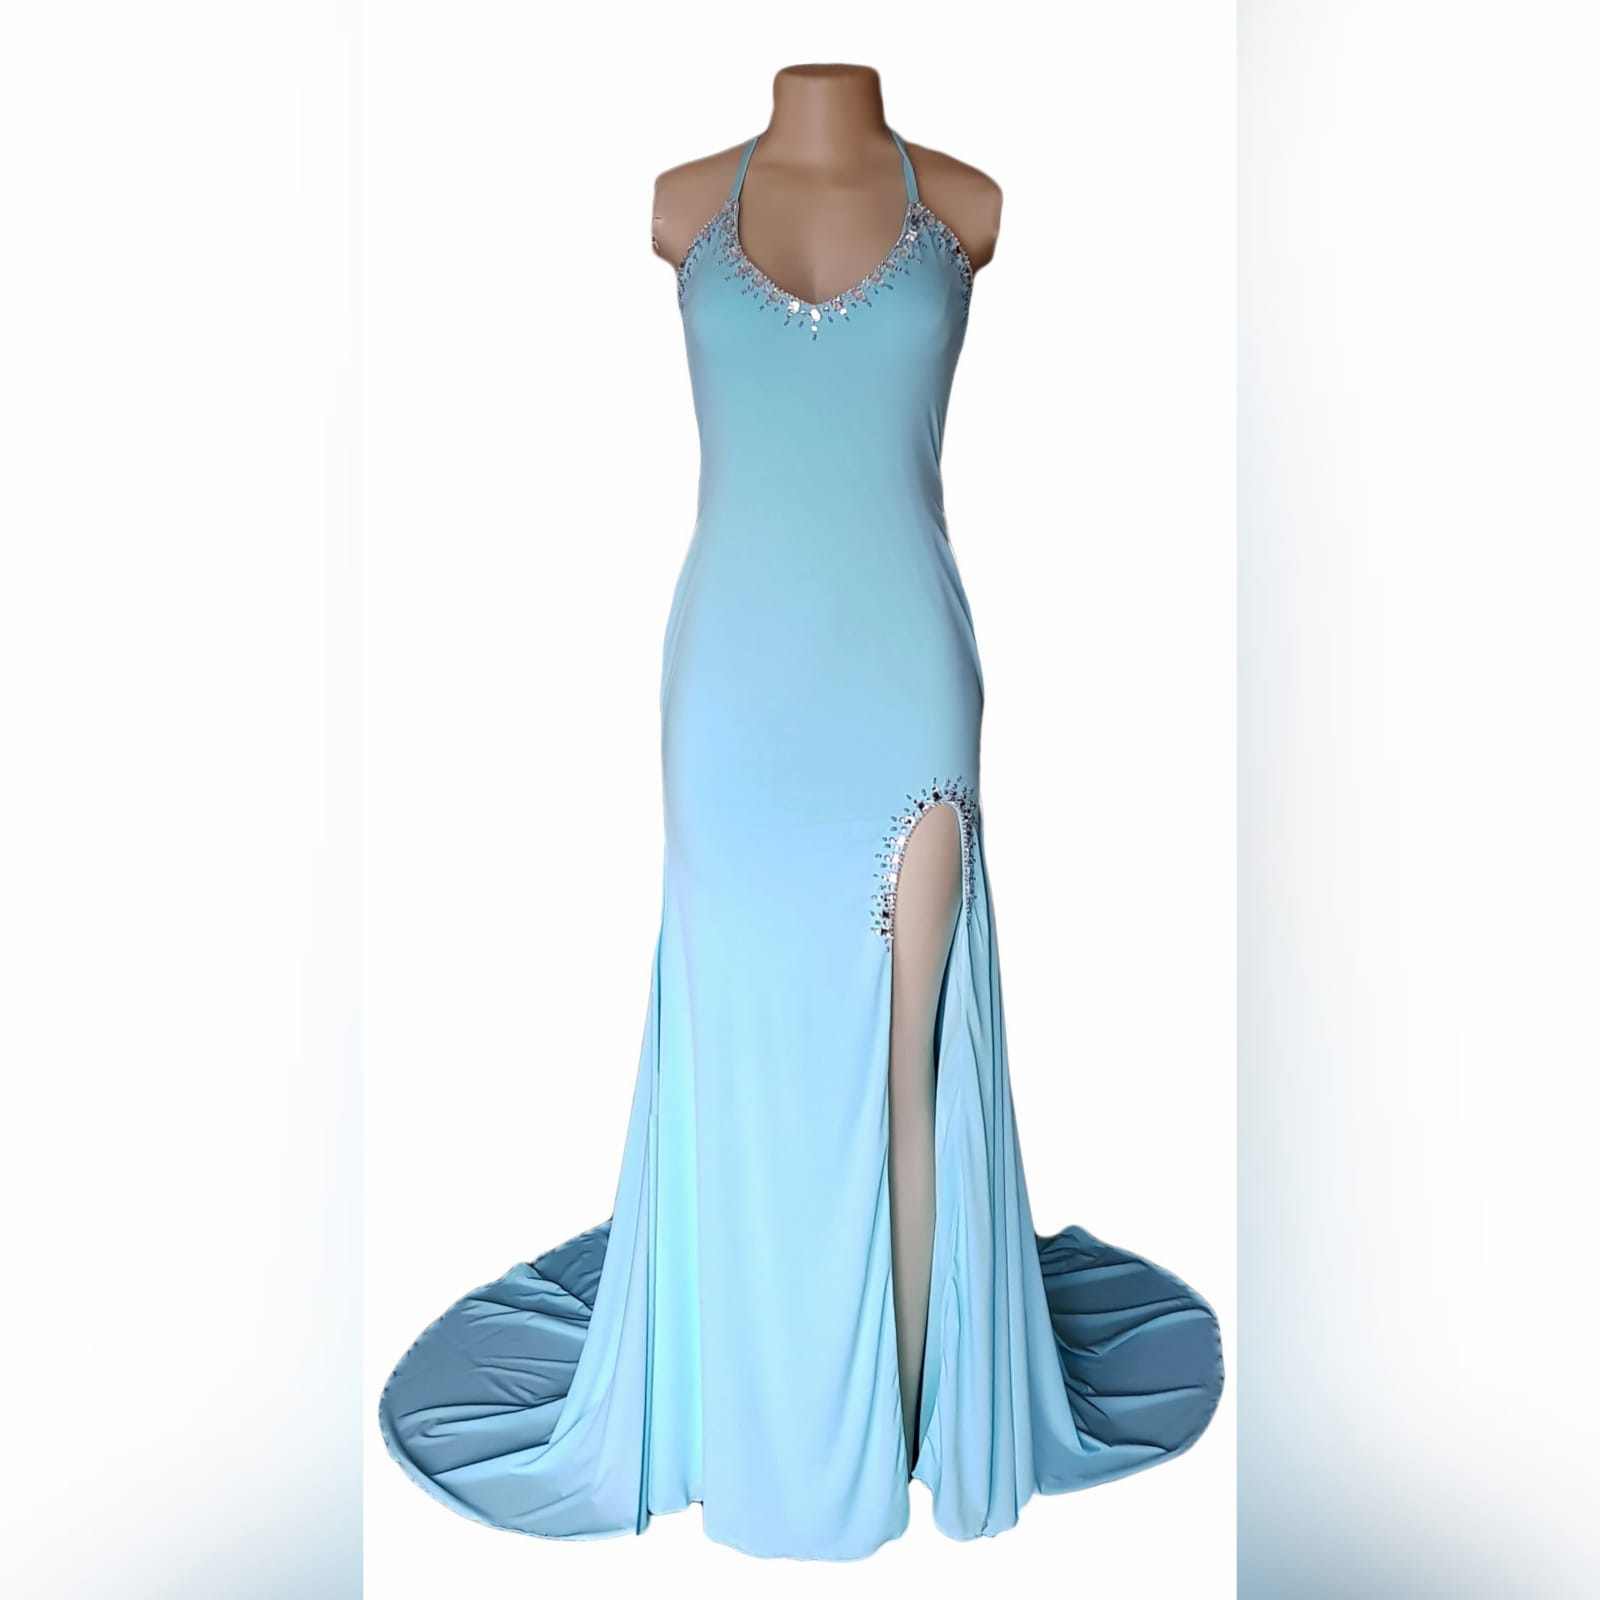 Aqua blue and silver prom dress 8 aqua blue and silver prom dress with a rounded neckline, open low v back with thin crossed straps, slit and a train. Dress detailed with silver beads and stones.